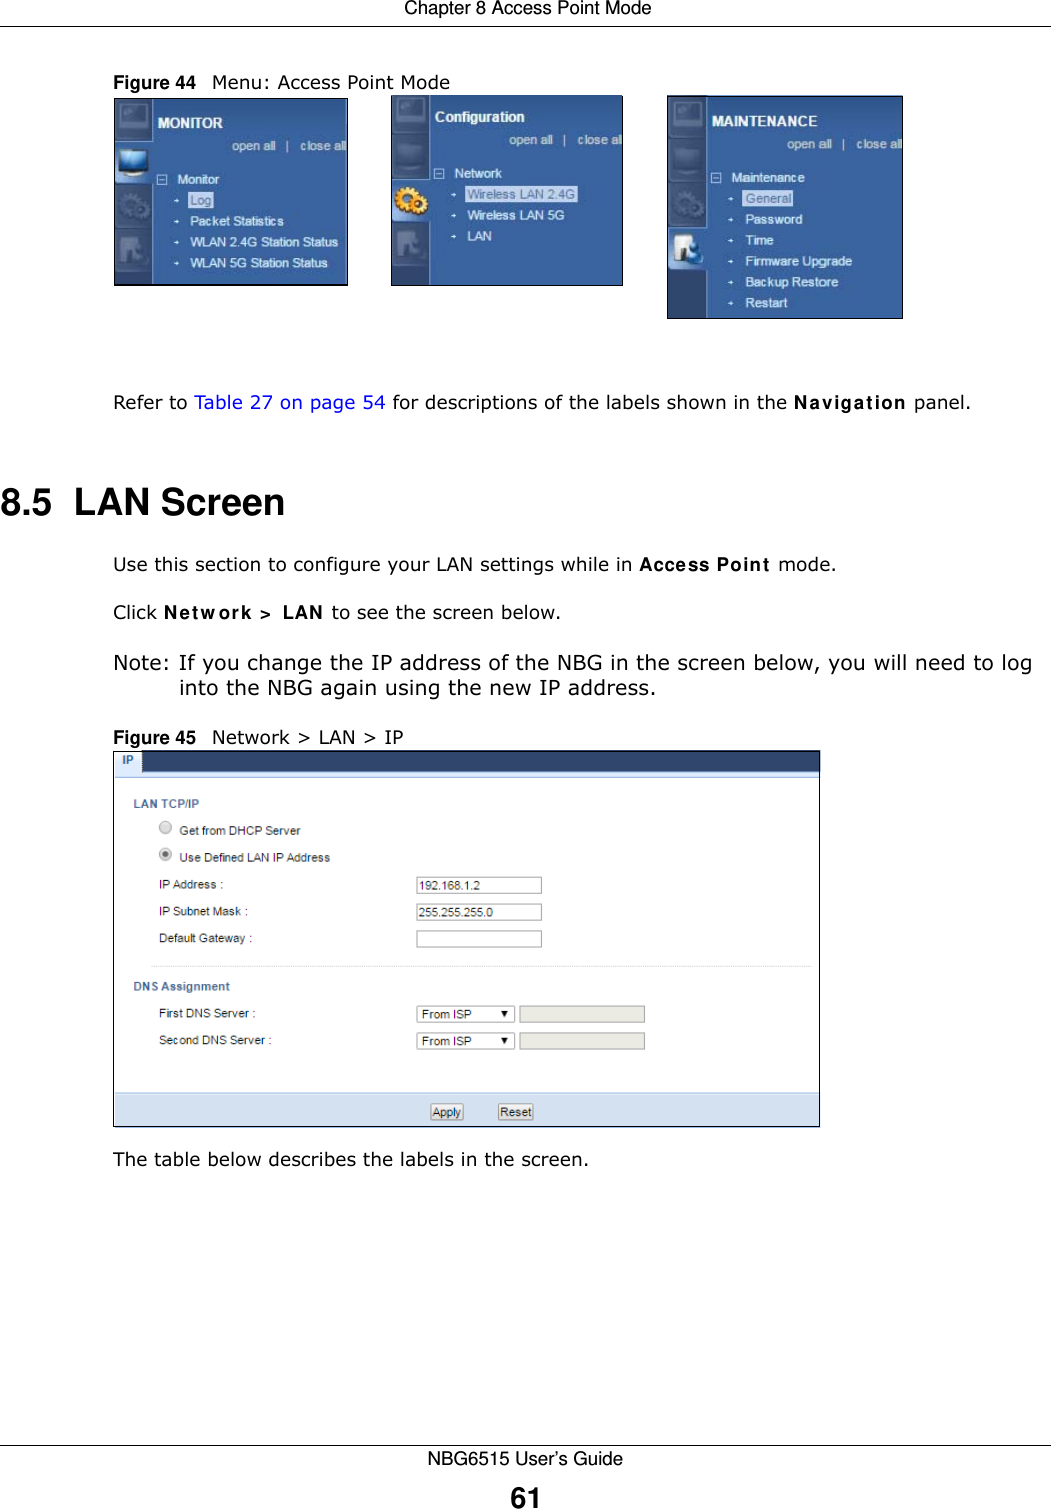  Chapter 8 Access Point ModeNBG6515 User’s Guide61Figure 44   Menu: Access Point Mode Refer to Table 27 on page 54 for descriptions of the labels shown in the Navigation panel.8.5  LAN ScreenUse this section to configure your LAN settings while in Access Point mode. Click Network &gt; LAN to see the screen below.Note: If you change the IP address of the NBG in the screen below, you will need to log into the NBG again using the new IP address.Figure 45   Network &gt; LAN &gt; IP   The table below describes the labels in the screen.